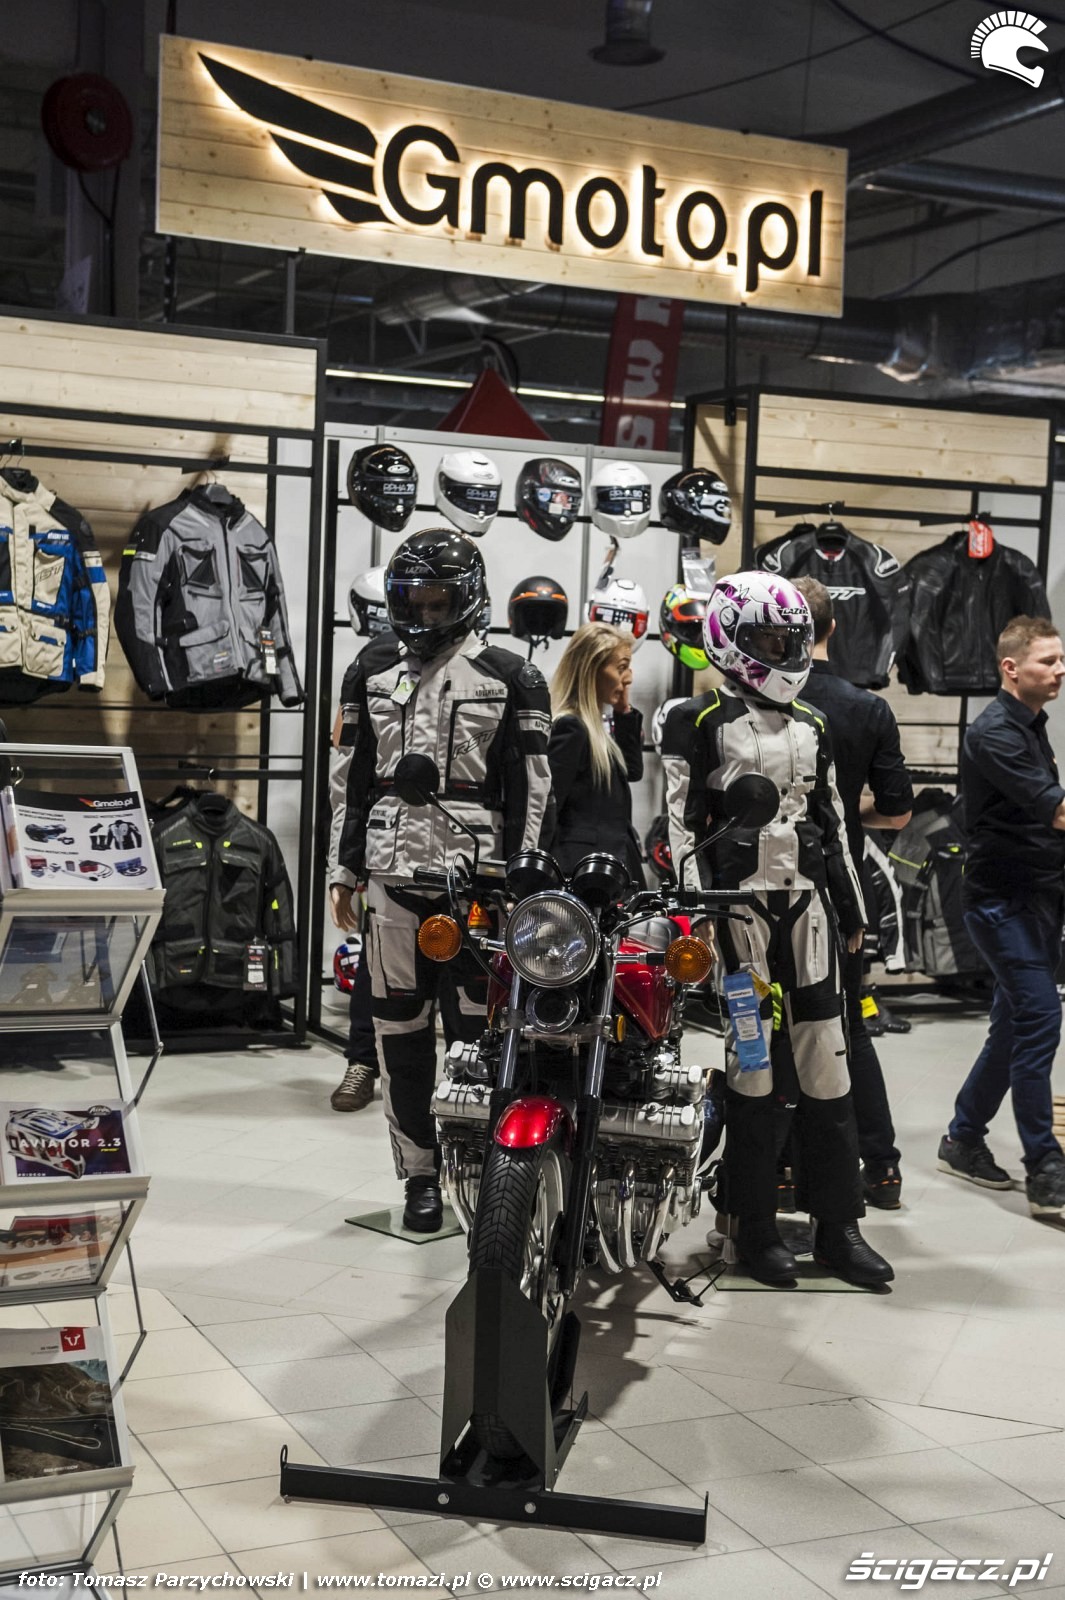 Warsaw Motorcycle Show 2019 Gmoto pl 05